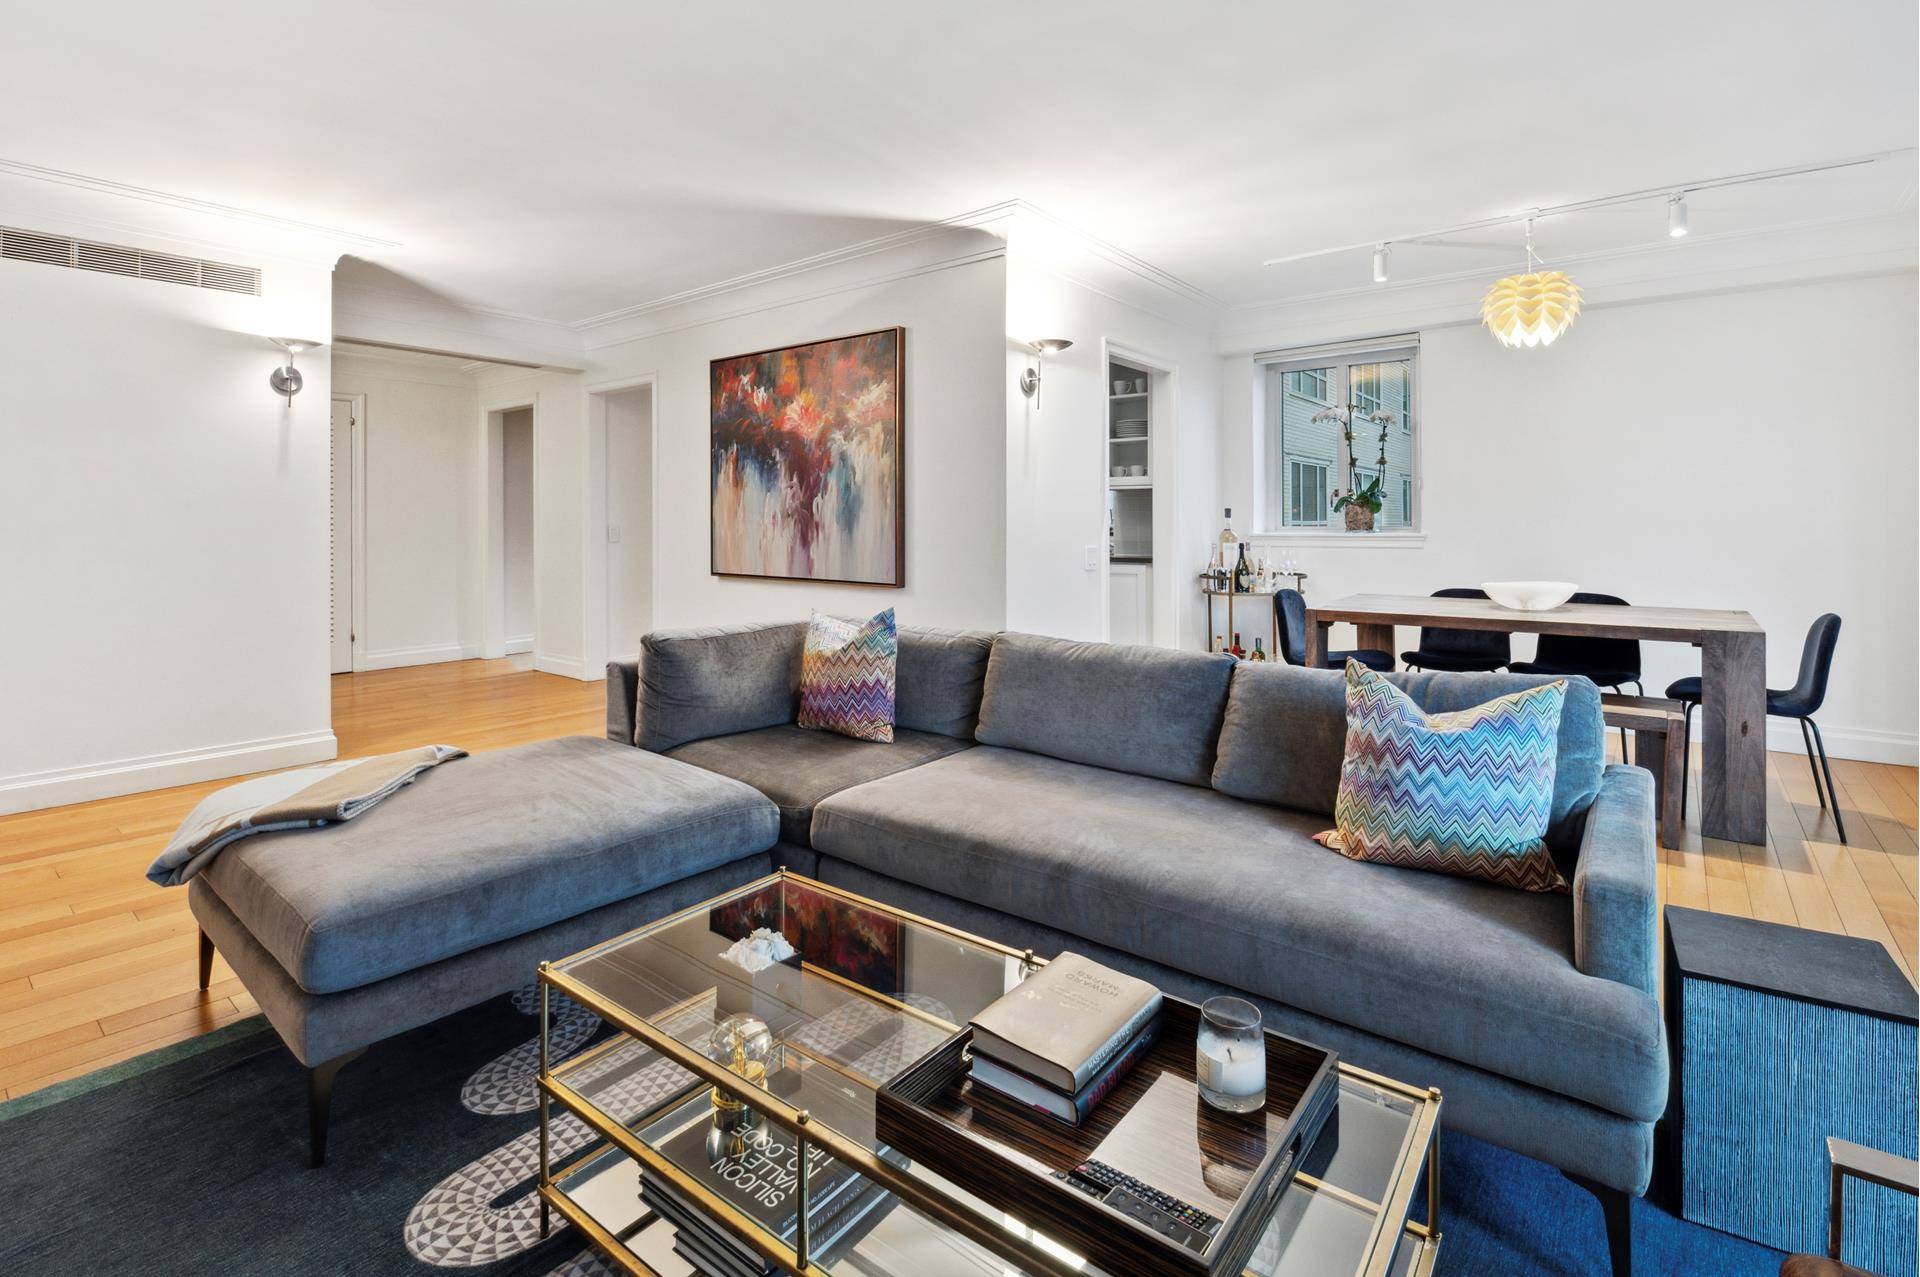 Mint condition Manhattan House Condominium 1 Bedroom, 1 Bath 1134SF on the 16th floor of the E tower, with gracious proportions, a Balcony, North and West open city views, and ...